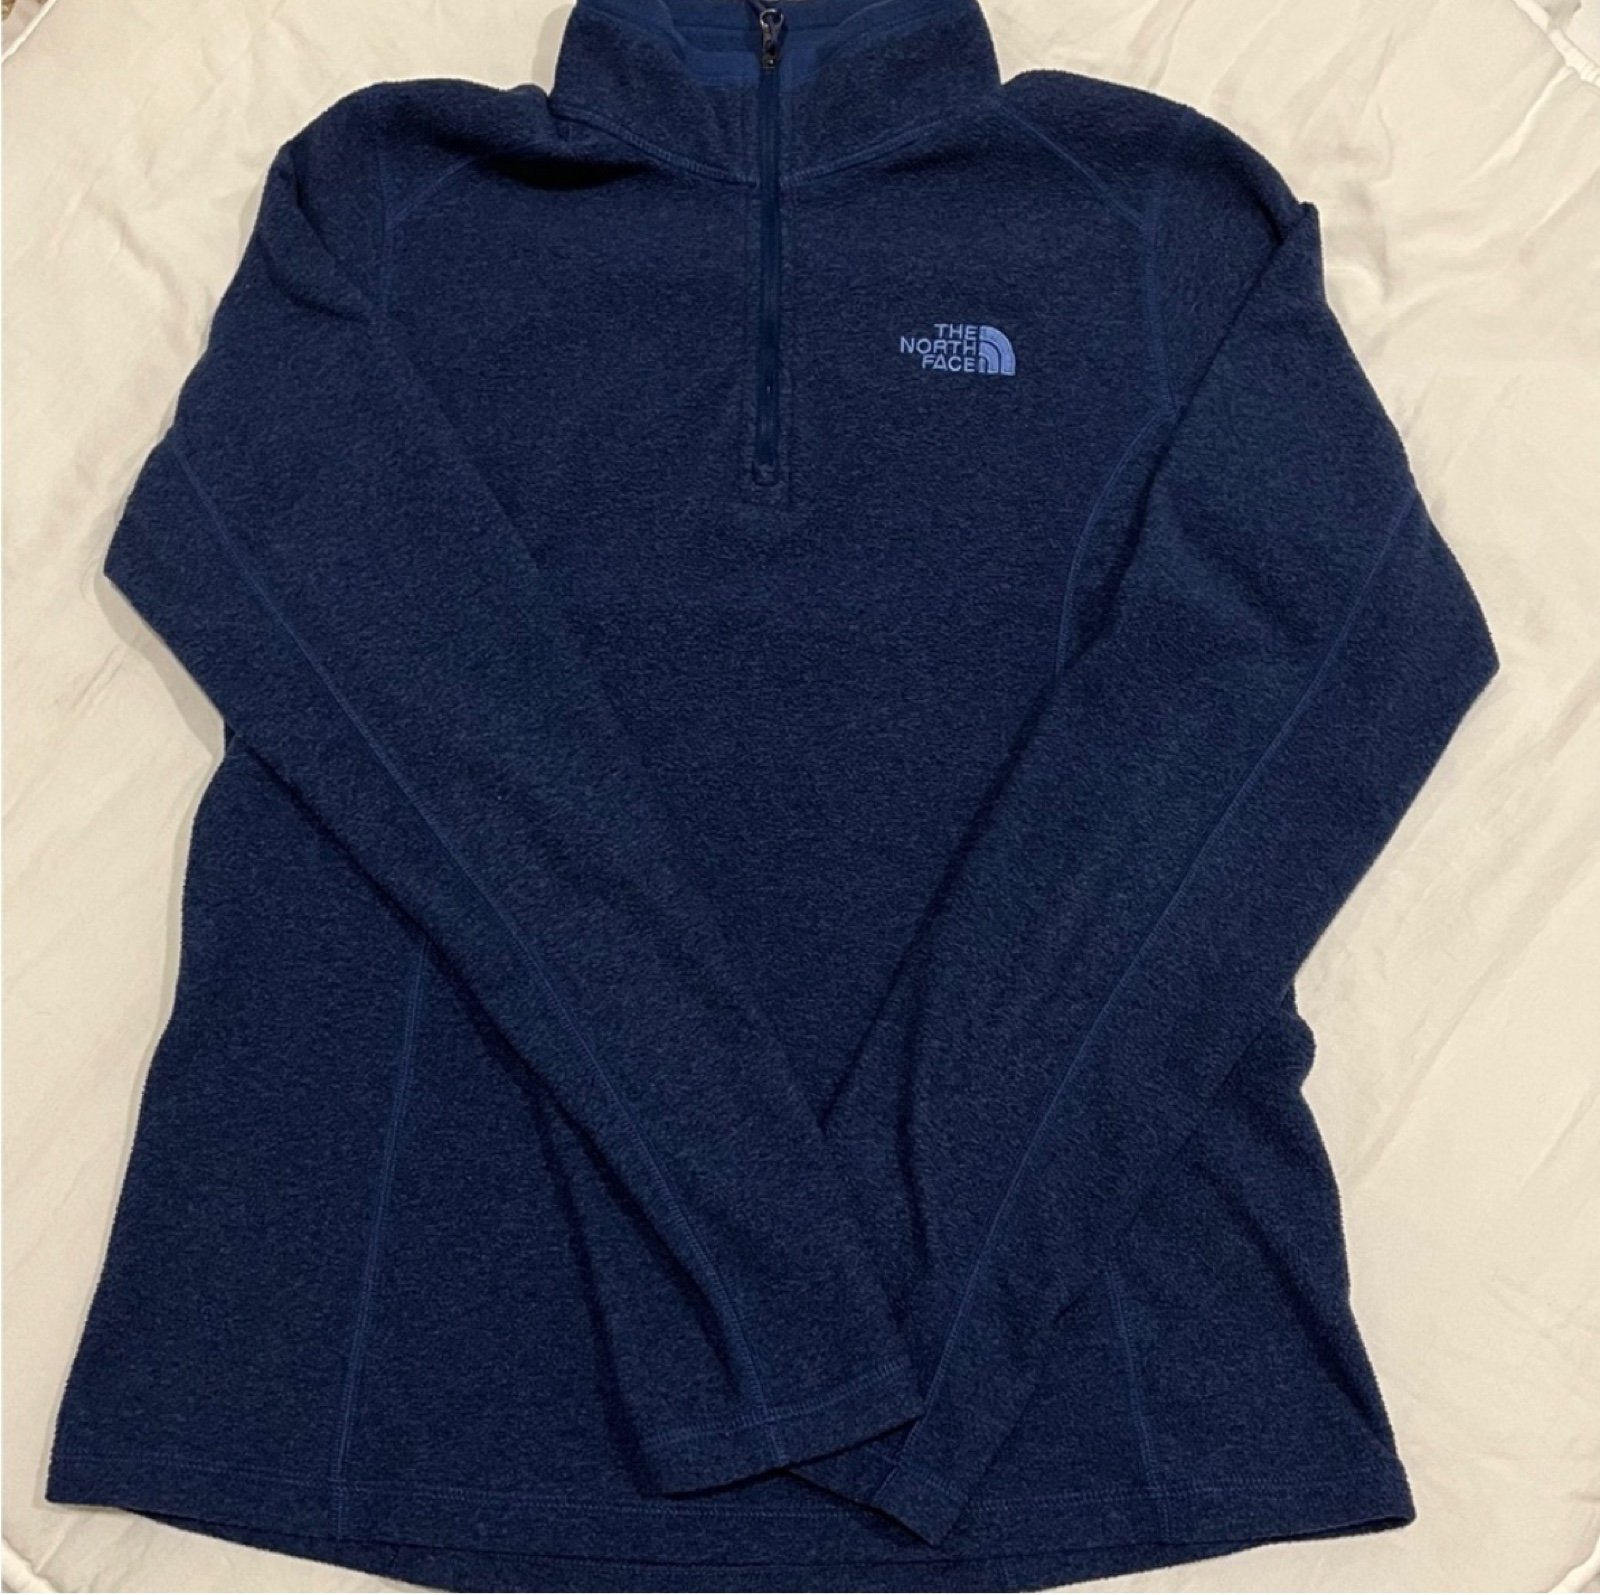 Cheap The north face half zip up knhiZvRSs Discount